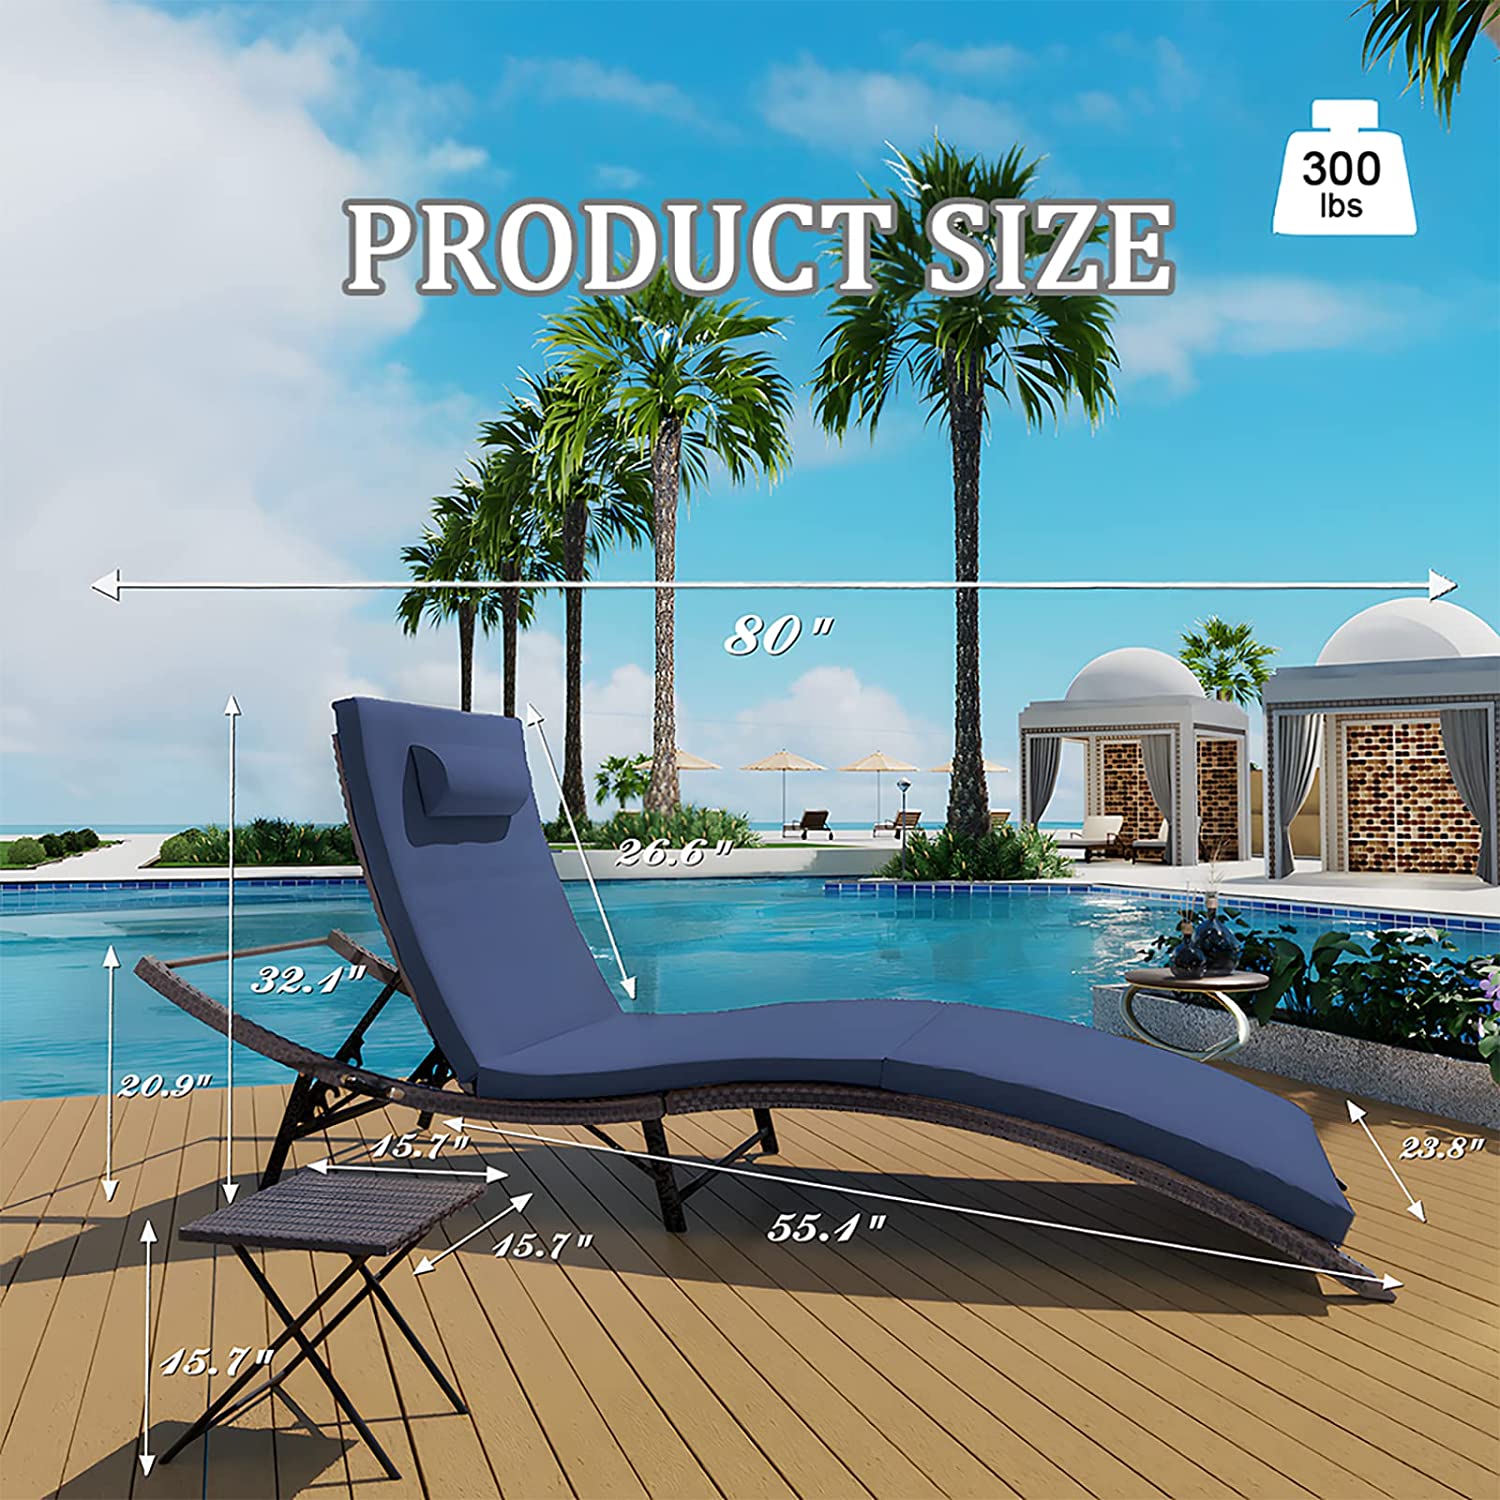 Gotland Patio Lounge Chair,3 Pieces Chaise Lounge Outdoor Folding leisure Lounge Chairs Including Table Rattan Patio Furniture Set,Navy blue - image 4 of 7